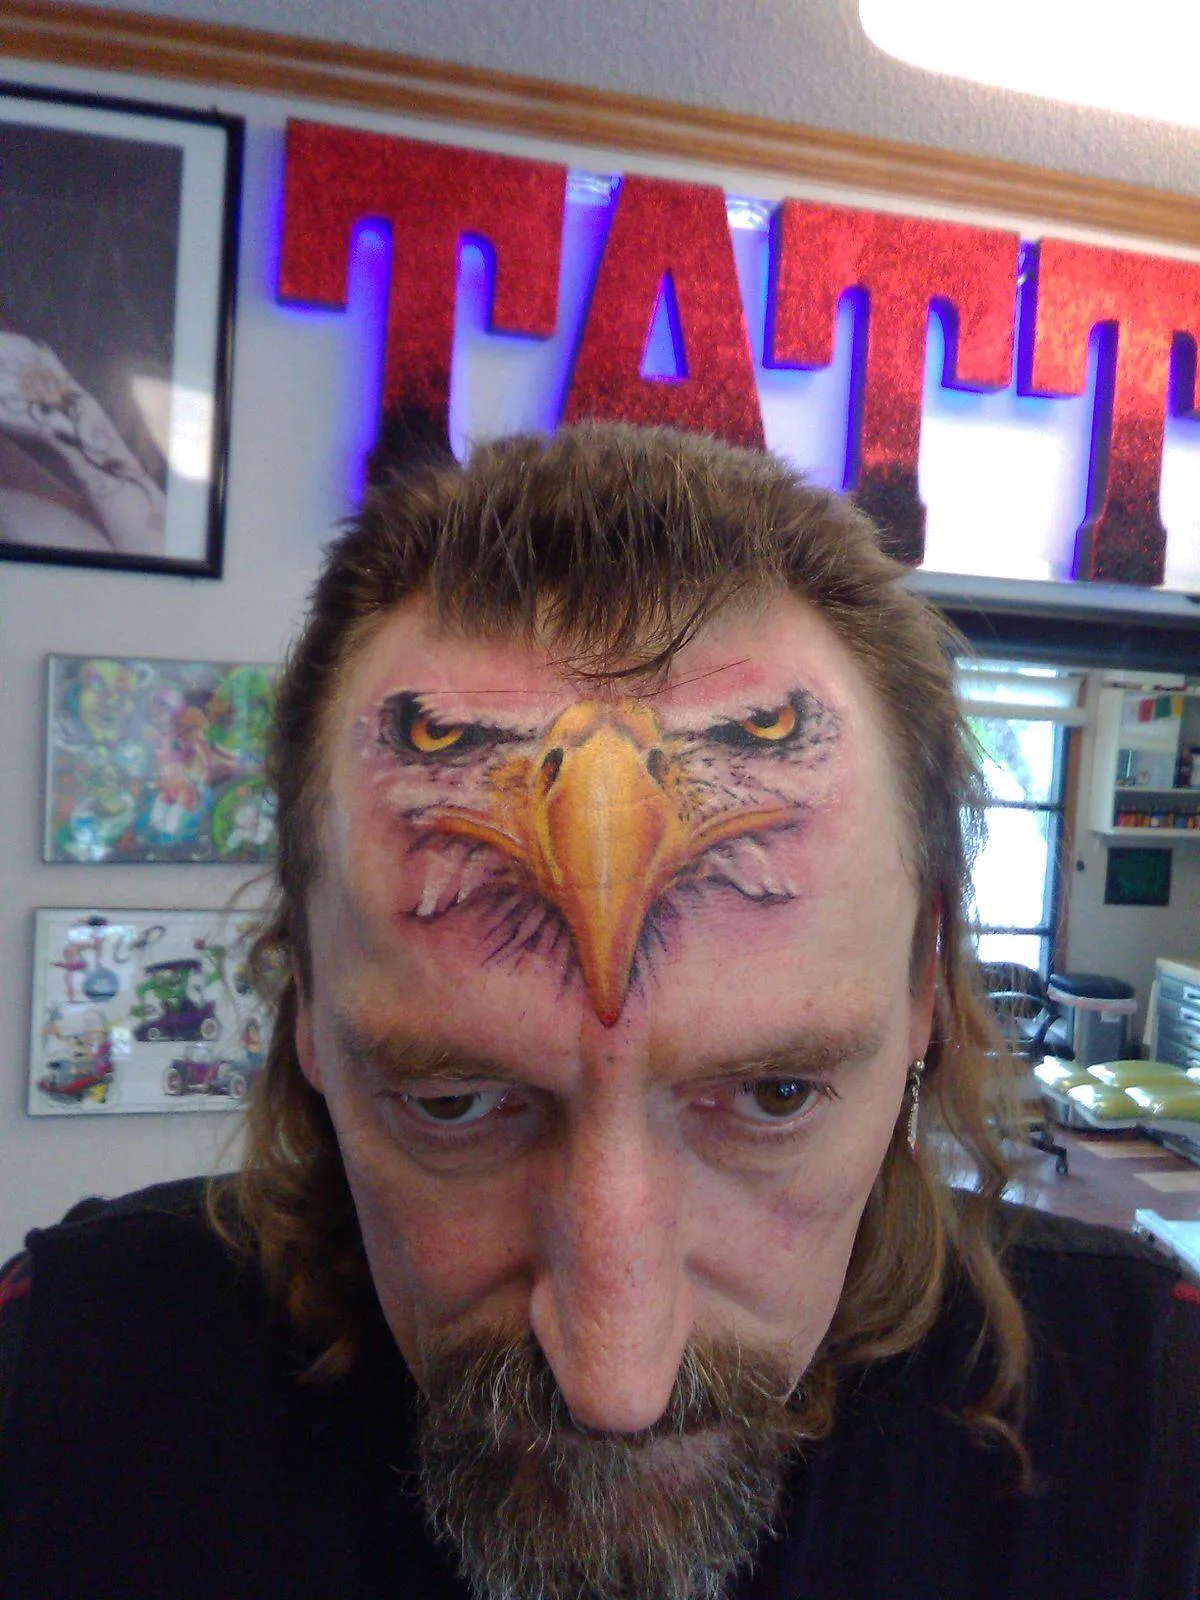 tattoo of eagle face on a man's forehead